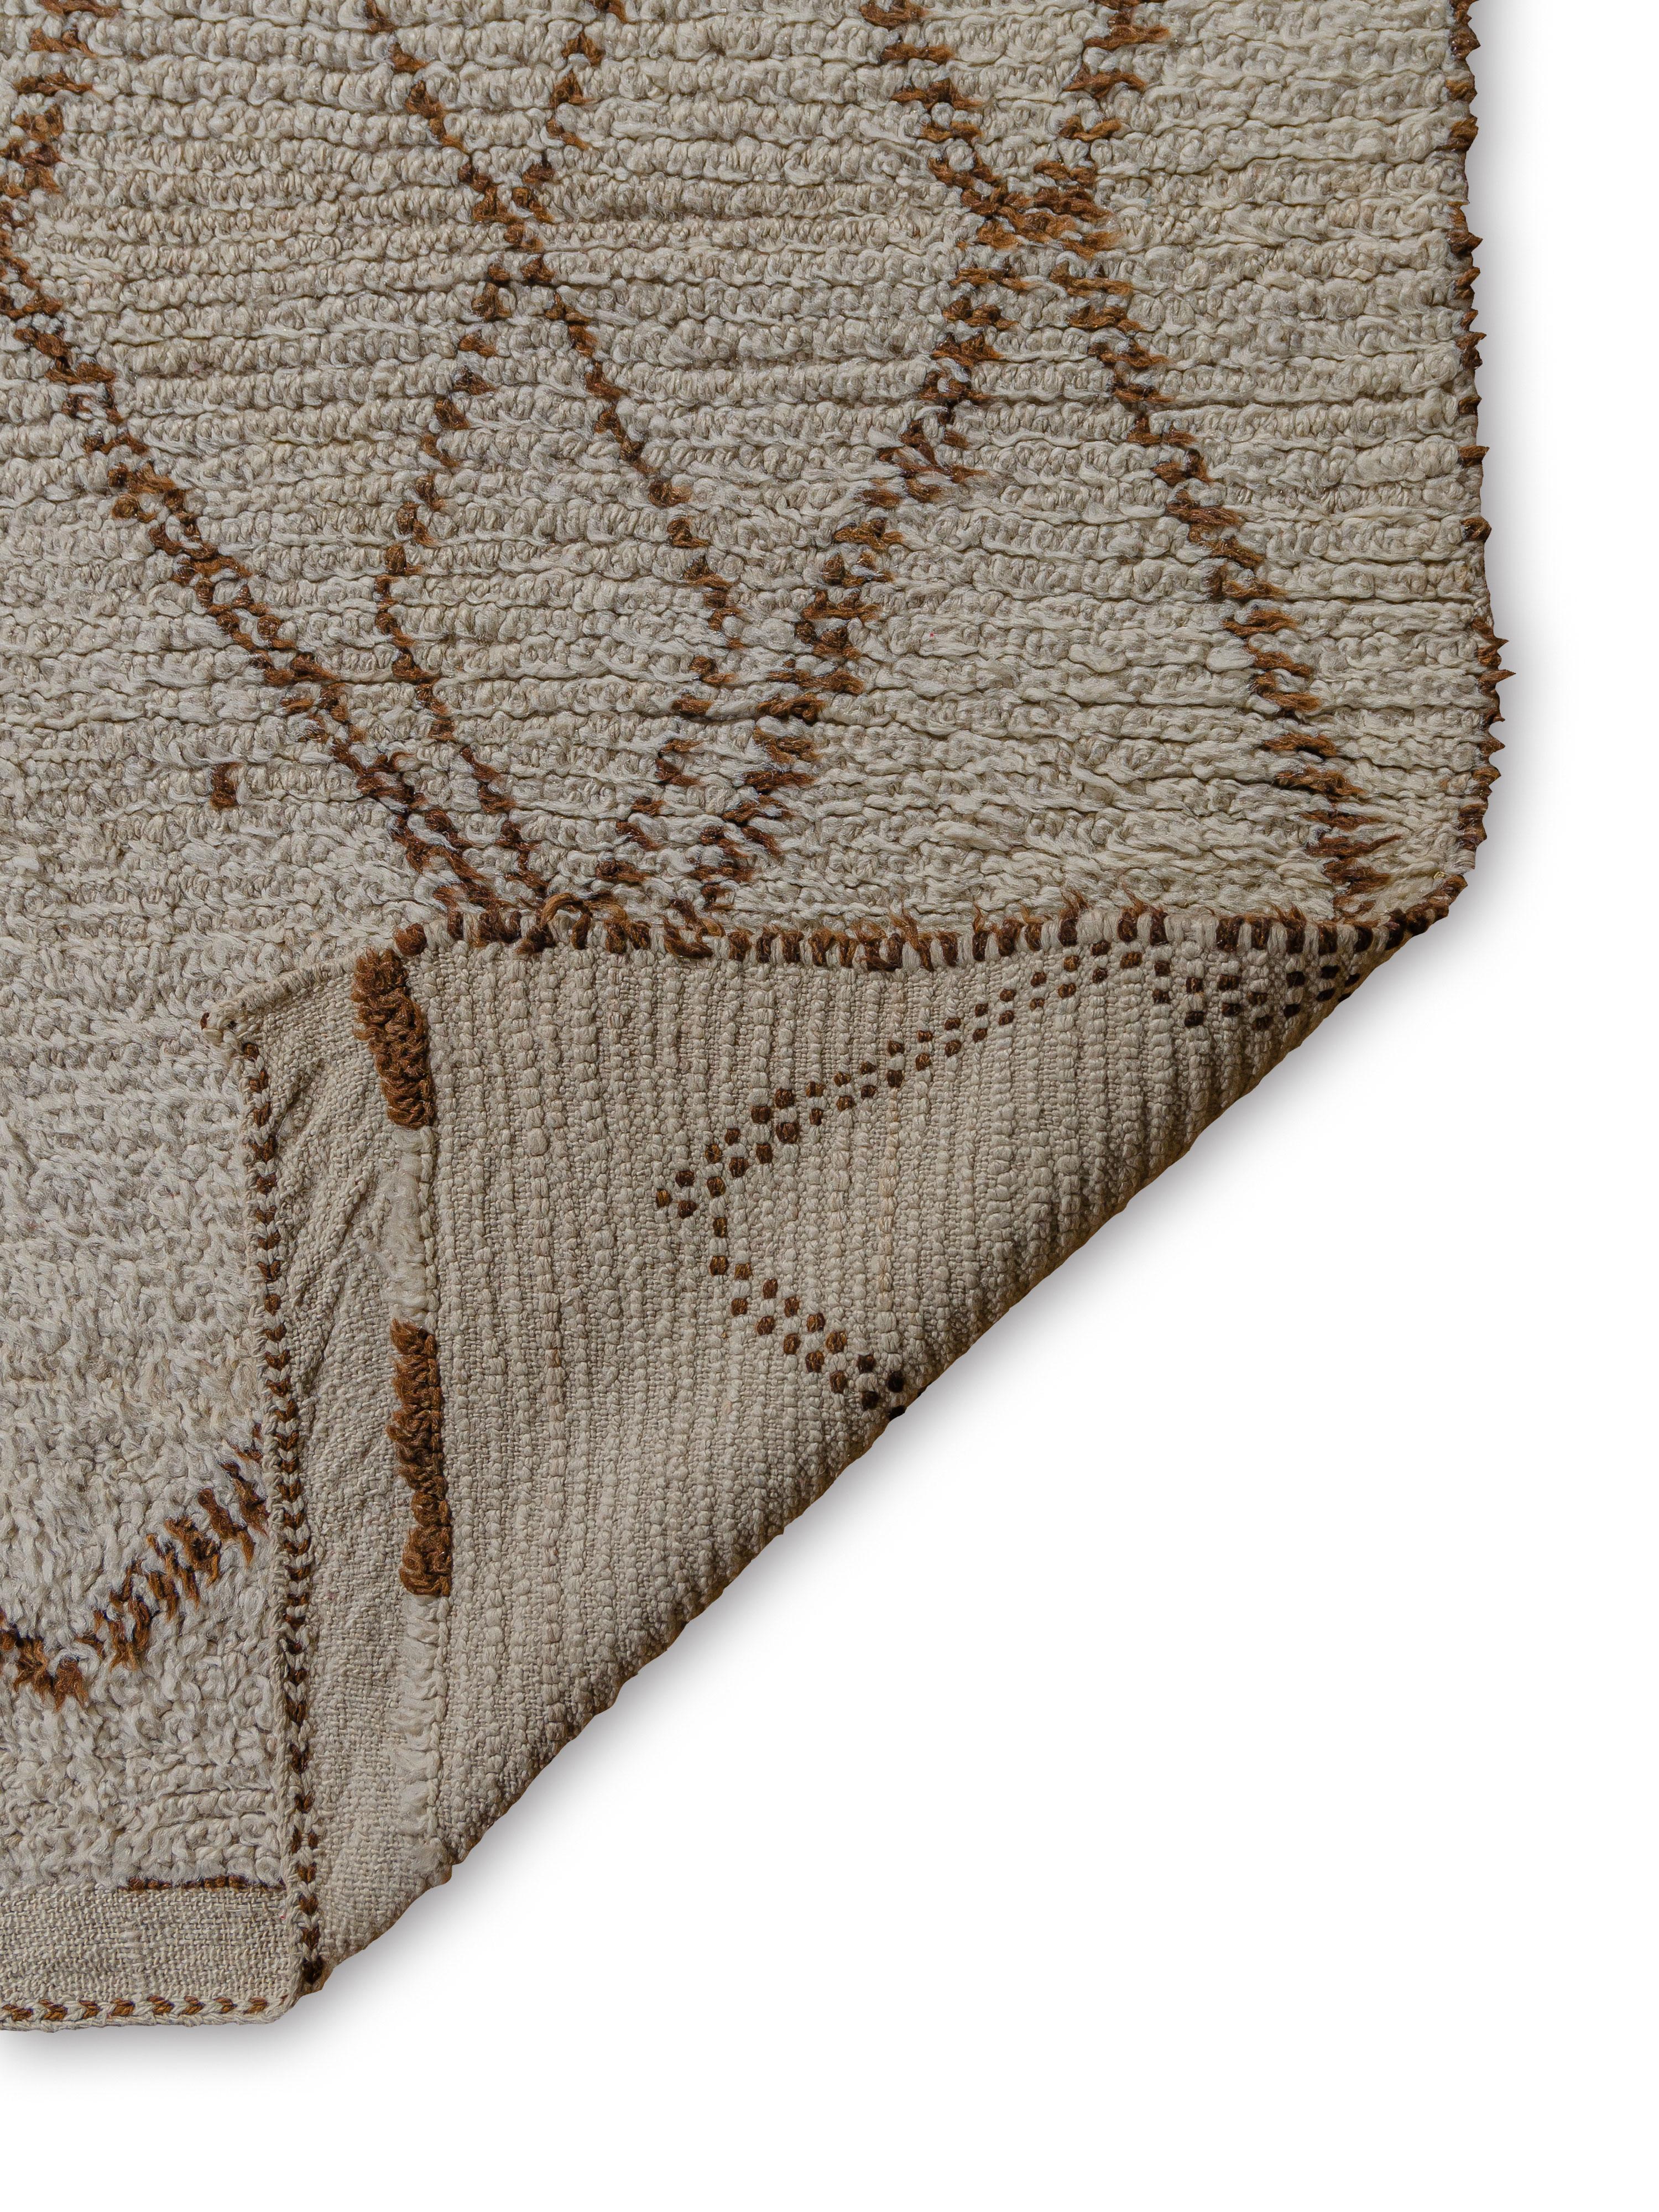 Hand-Woven Vintage Moroccan Berber Beni Ouarain Carpet curated by Breuckelen Berber For Sale